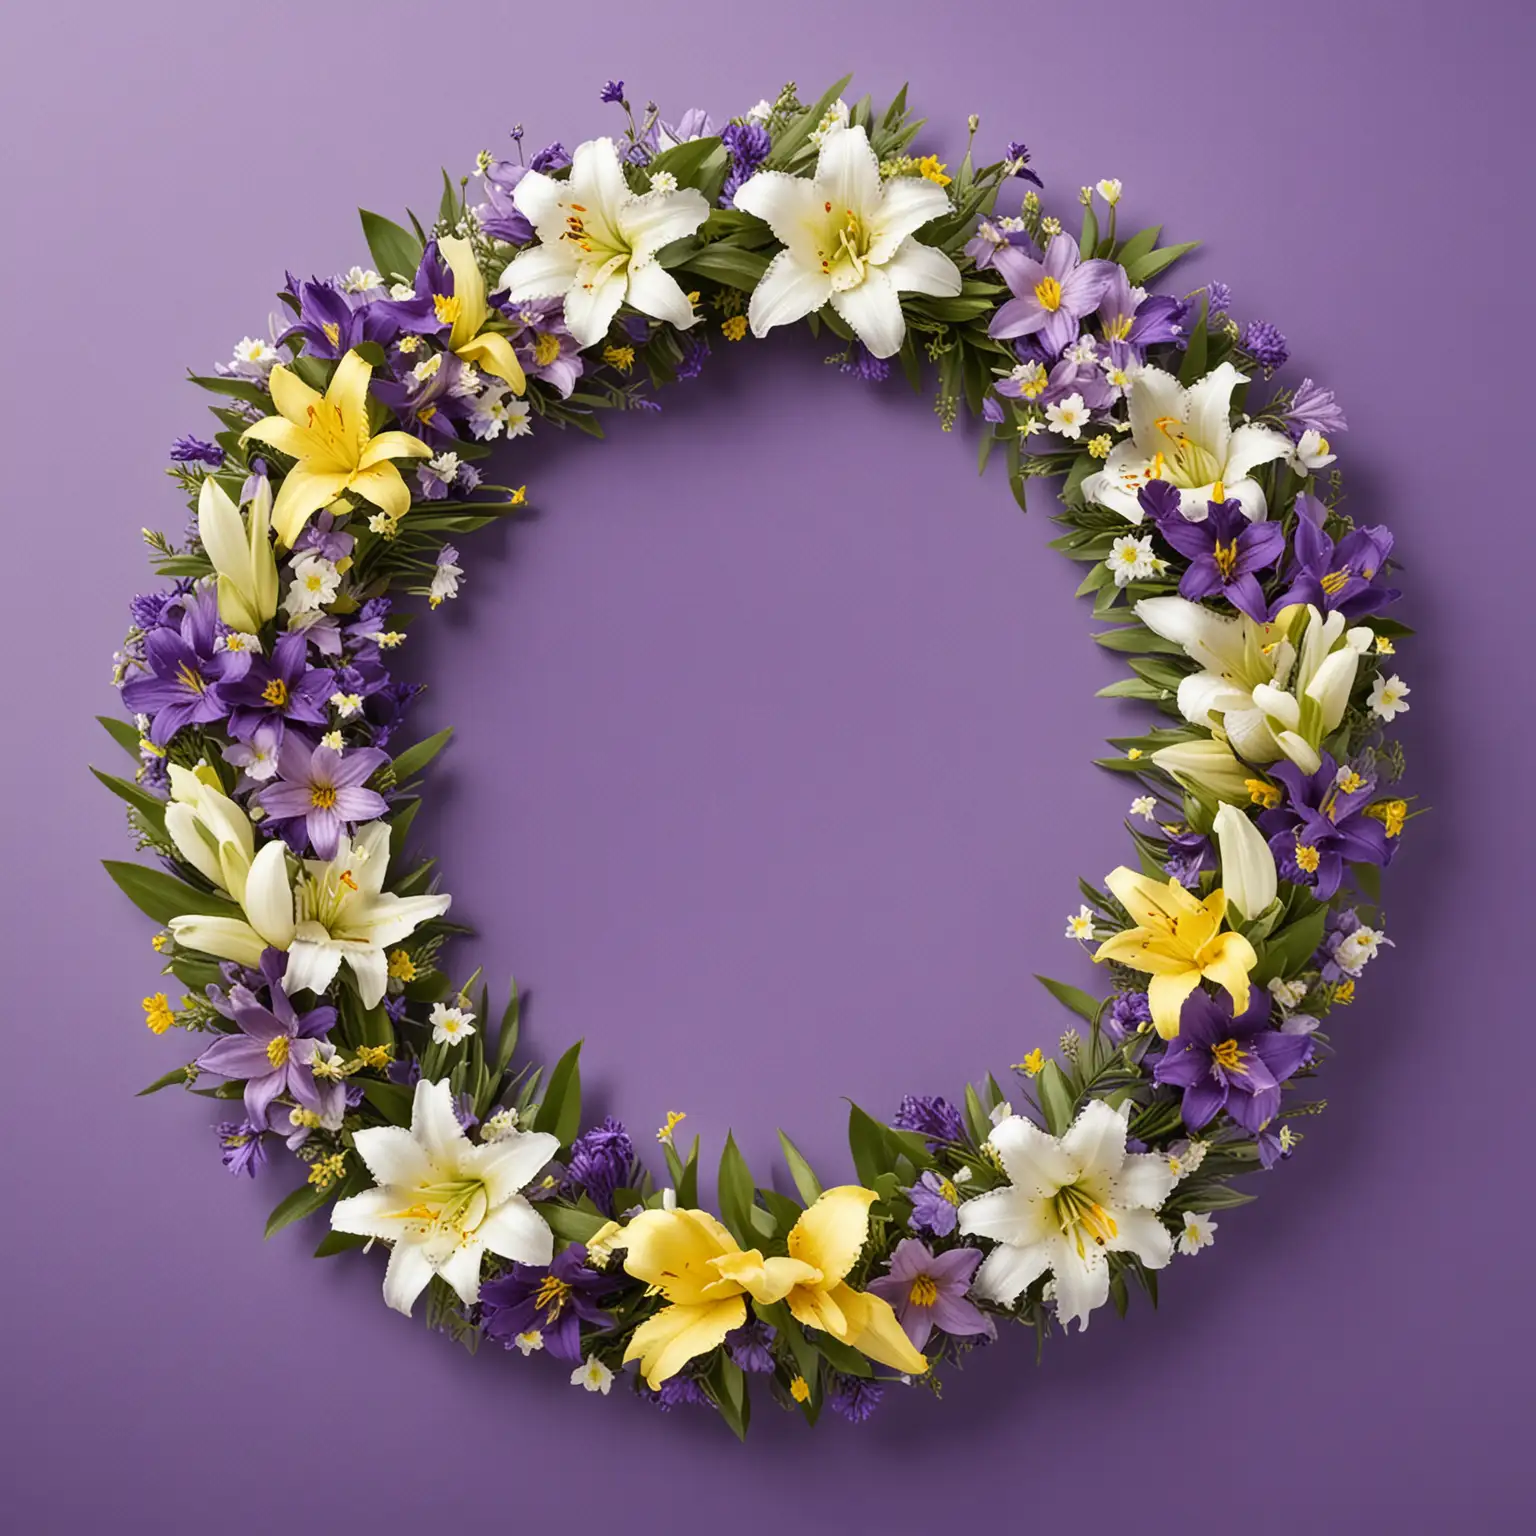 Easter Card  horizontal shape with floral wreath - flowers to be purple, yellow and white include small lily flowers.  Floral wreath to have a purple ribbon tied